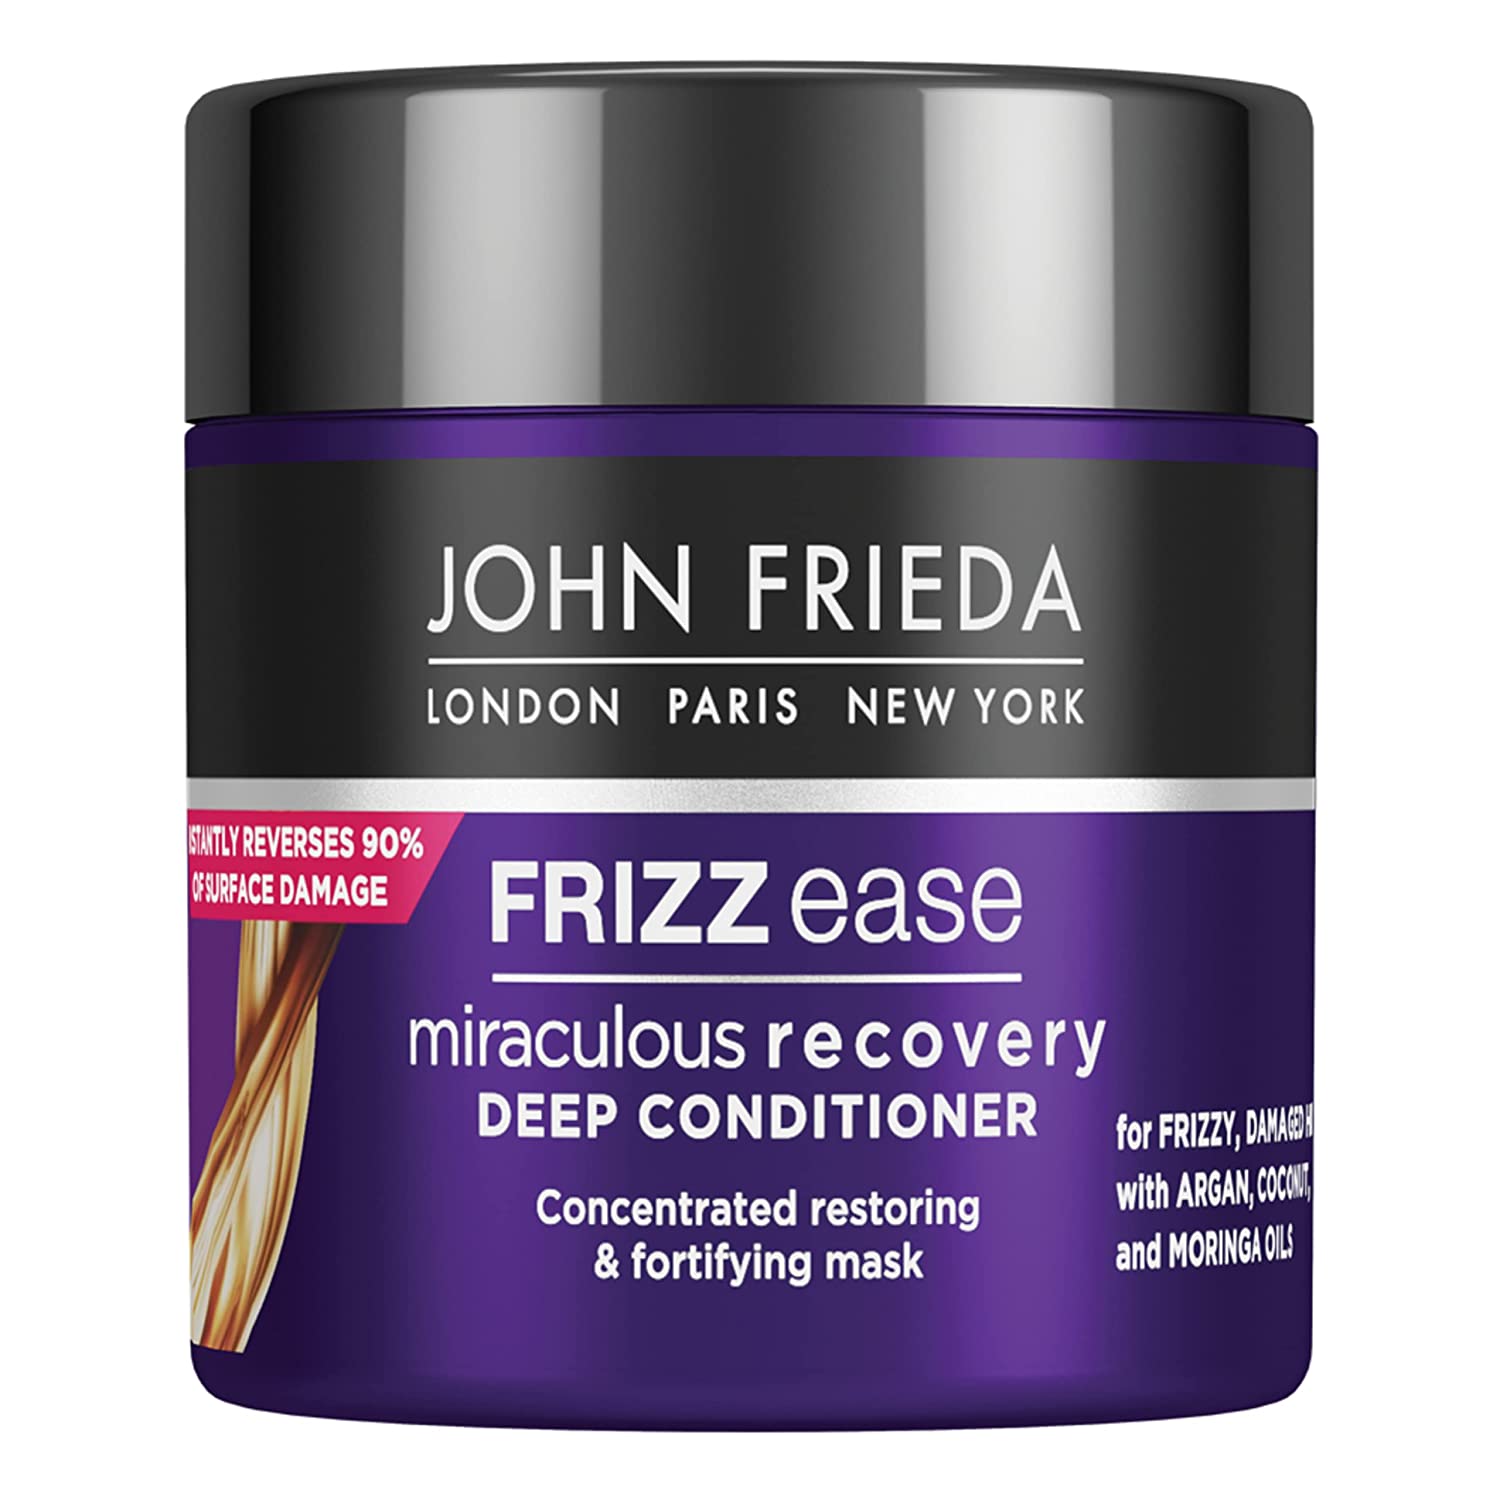 John Frieda Frizz-Ease Miraculous Recovery Conditioner 150ml, ‎deep